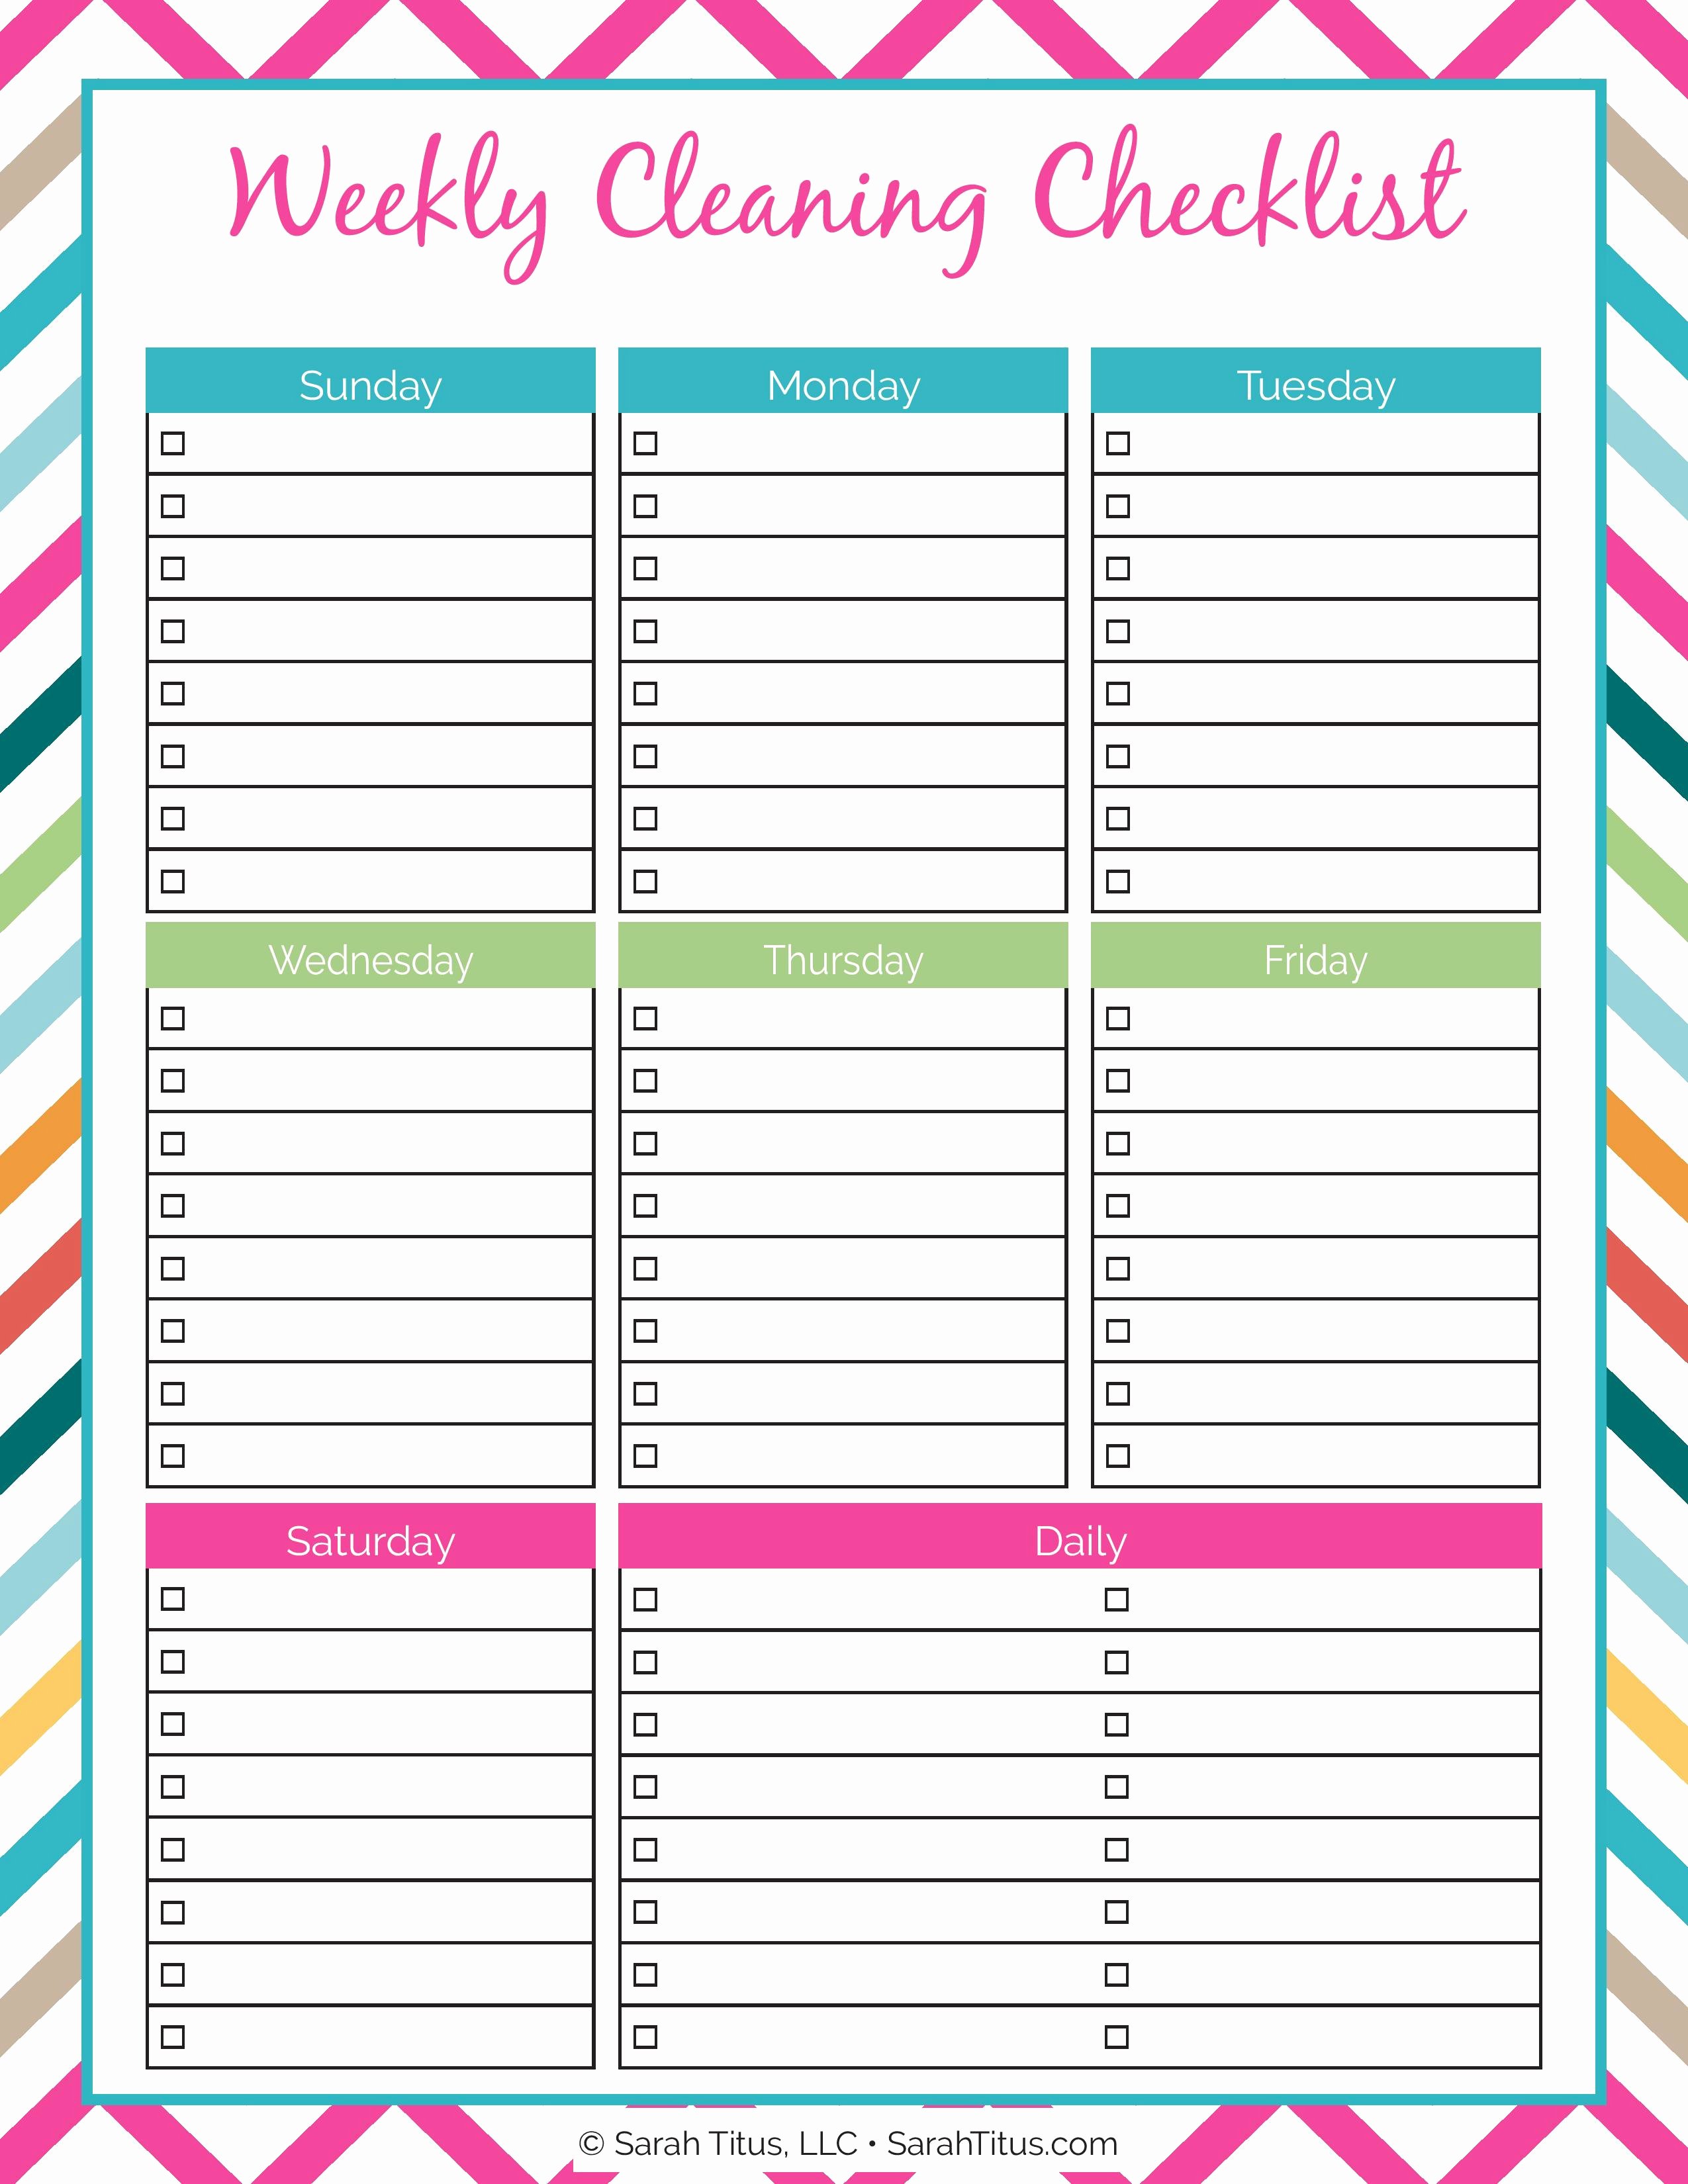 Monthly Cleaning Schedule Template Luxury Cleaning Binder Weekly Cleaning Checklist Sarah Titus